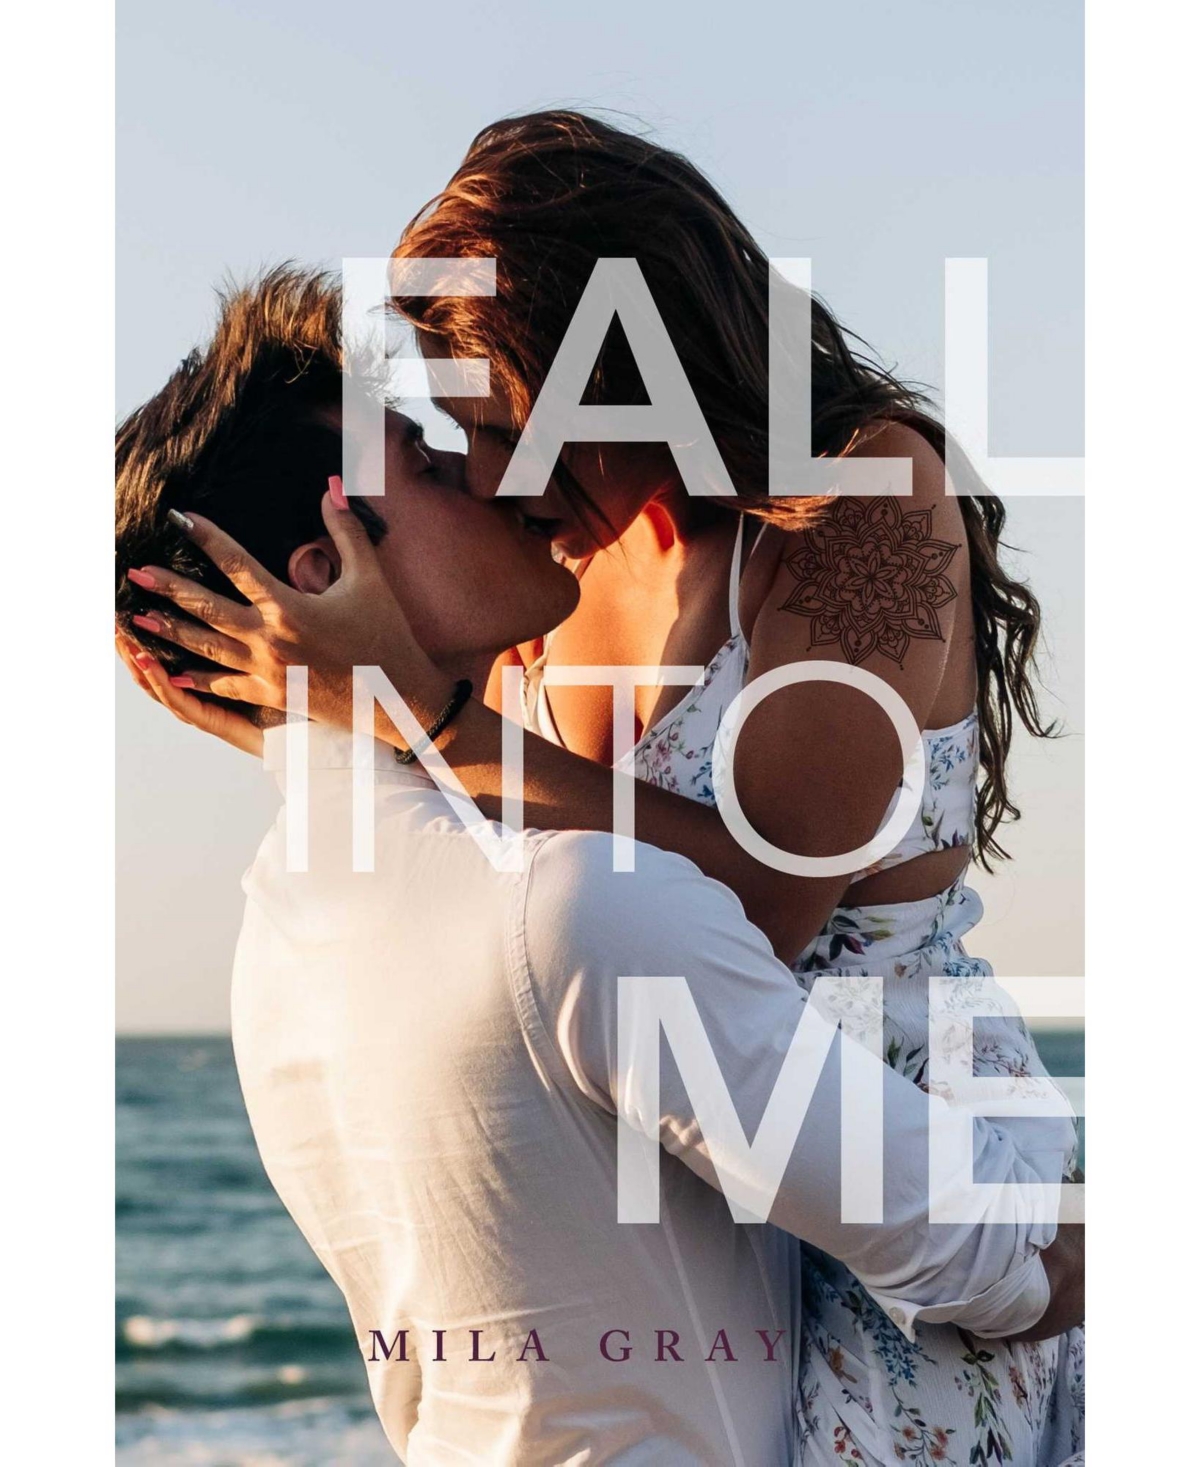 Fall into Me by Mila Gray